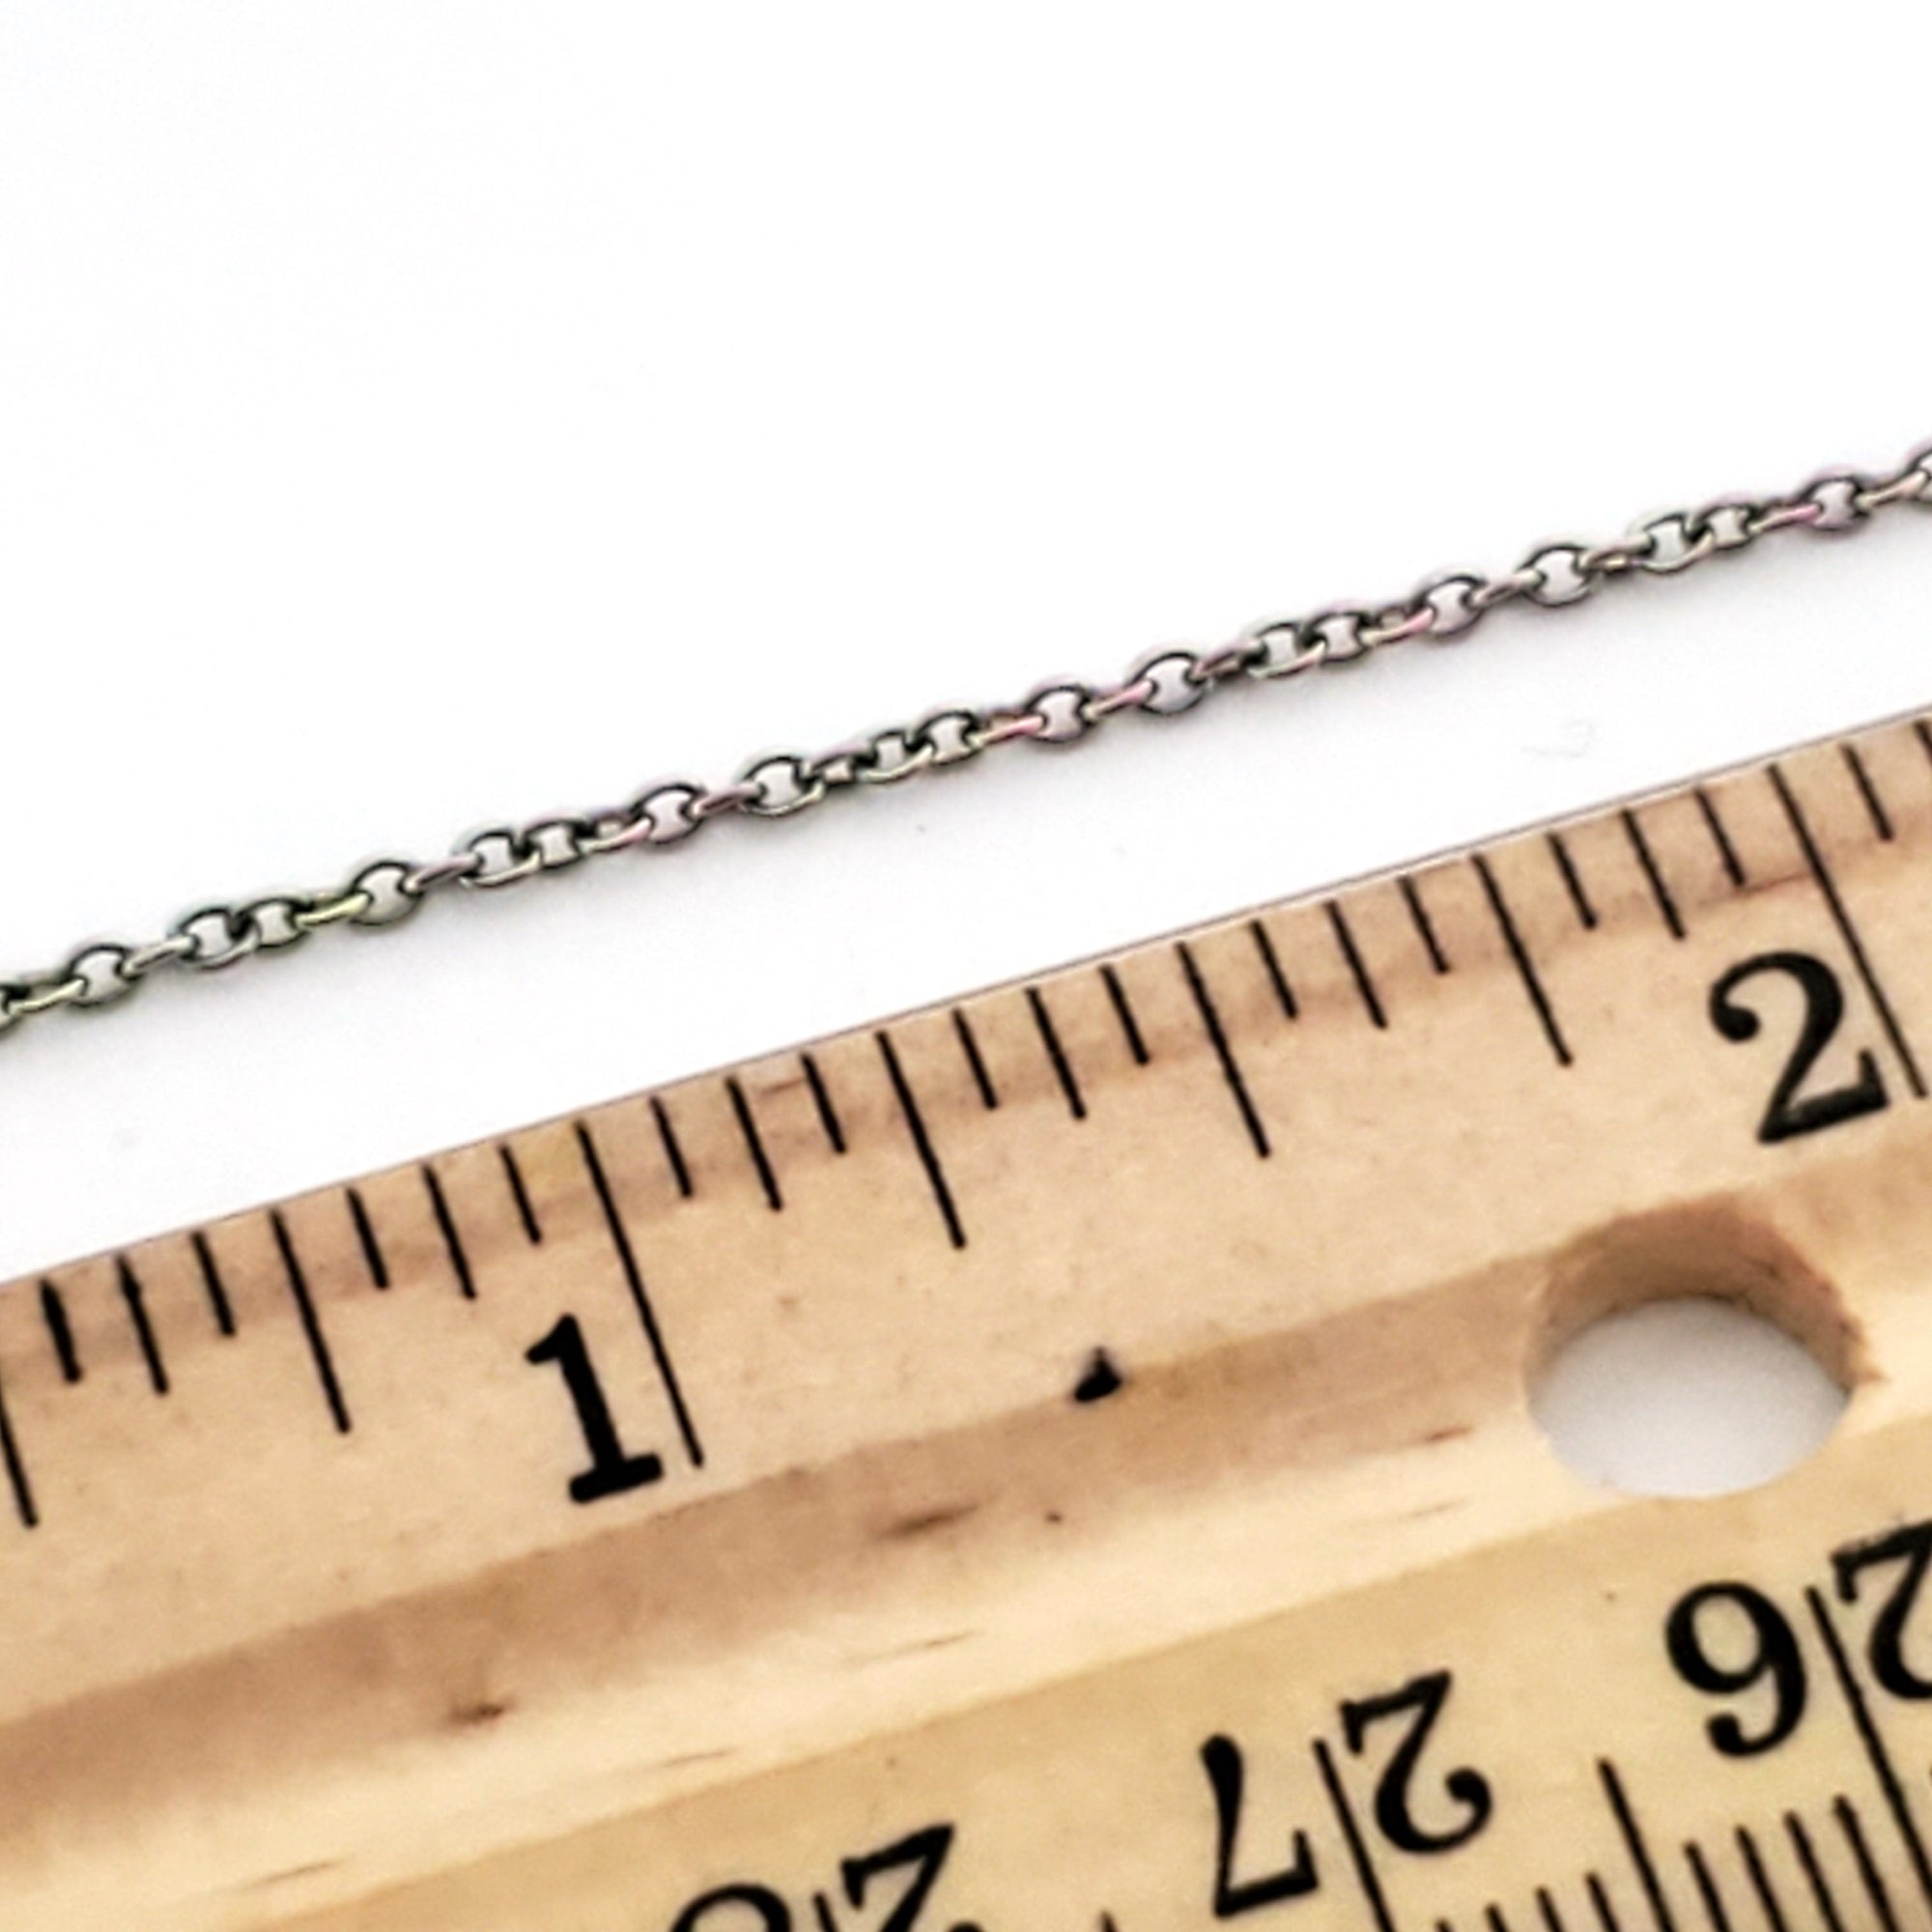 Stainless Steel Jewelry Chain, Twist Chain, Bulk Supplies, Jewelry Making,  Non Tarnish Findings, 6x4.5x1.2mm Lot Size 2 to 20 Feet, 1930 